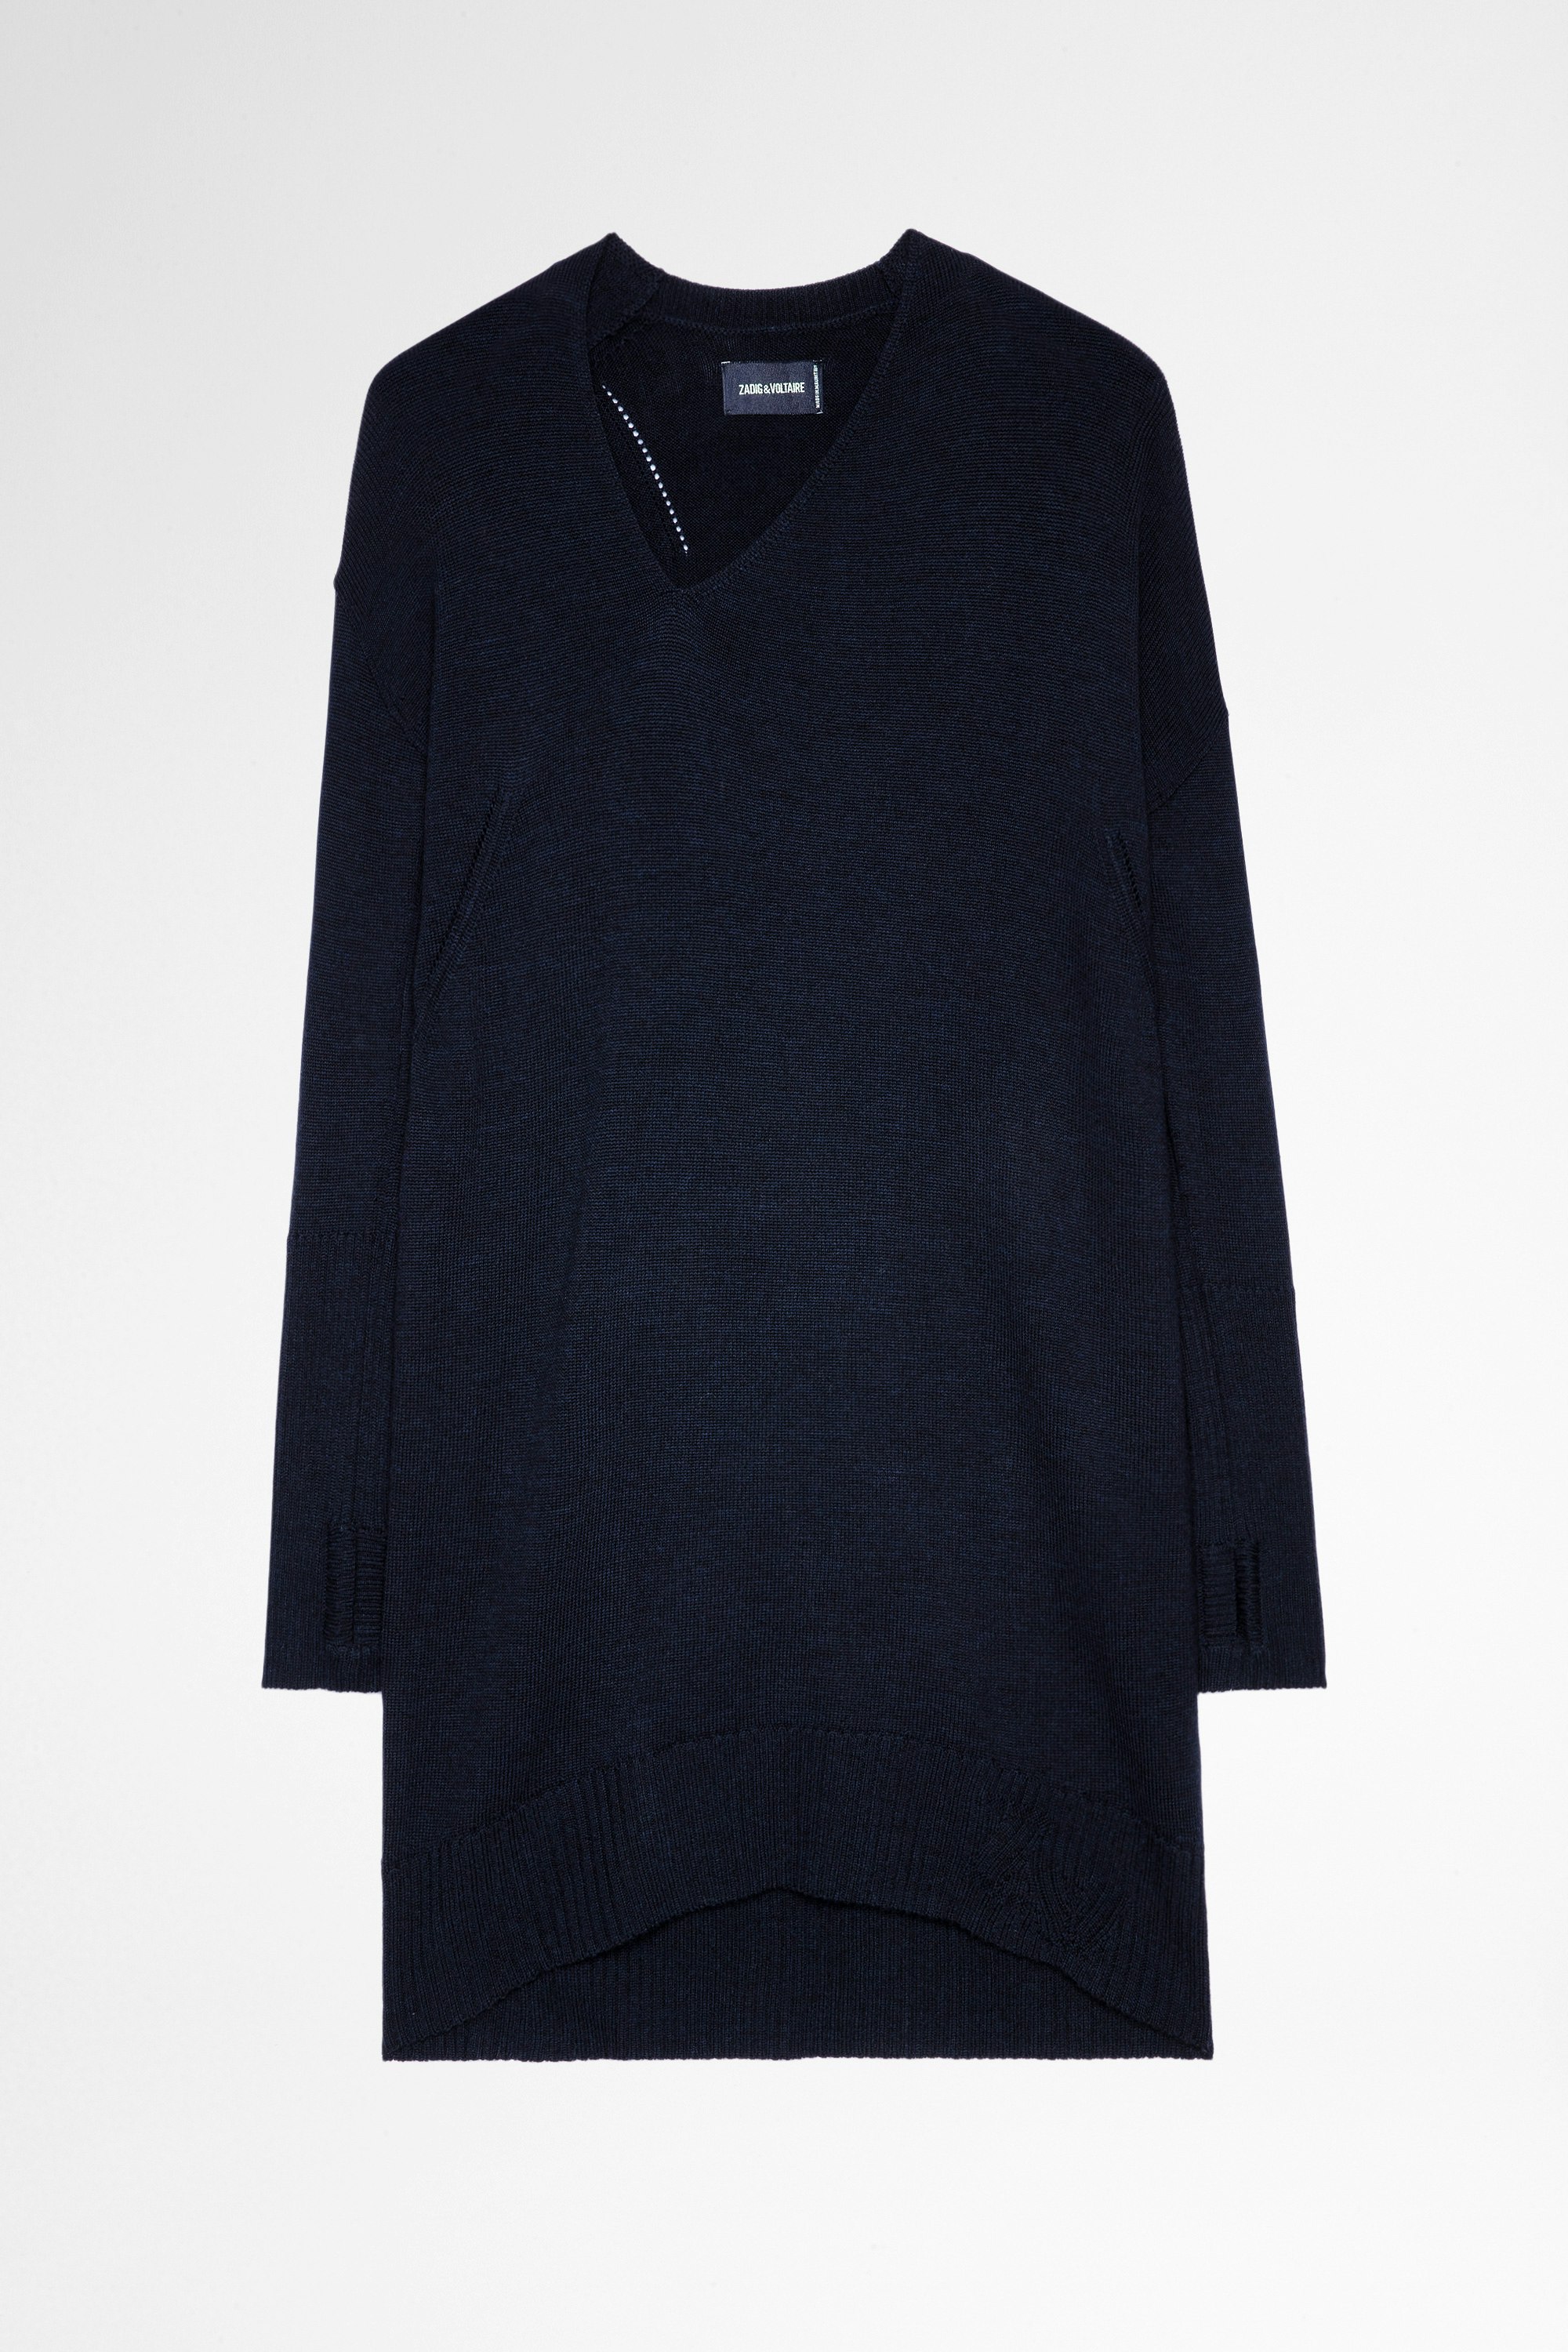 Dean ドレス Women's navy blue knitted sweater dress with asymmetrical collar